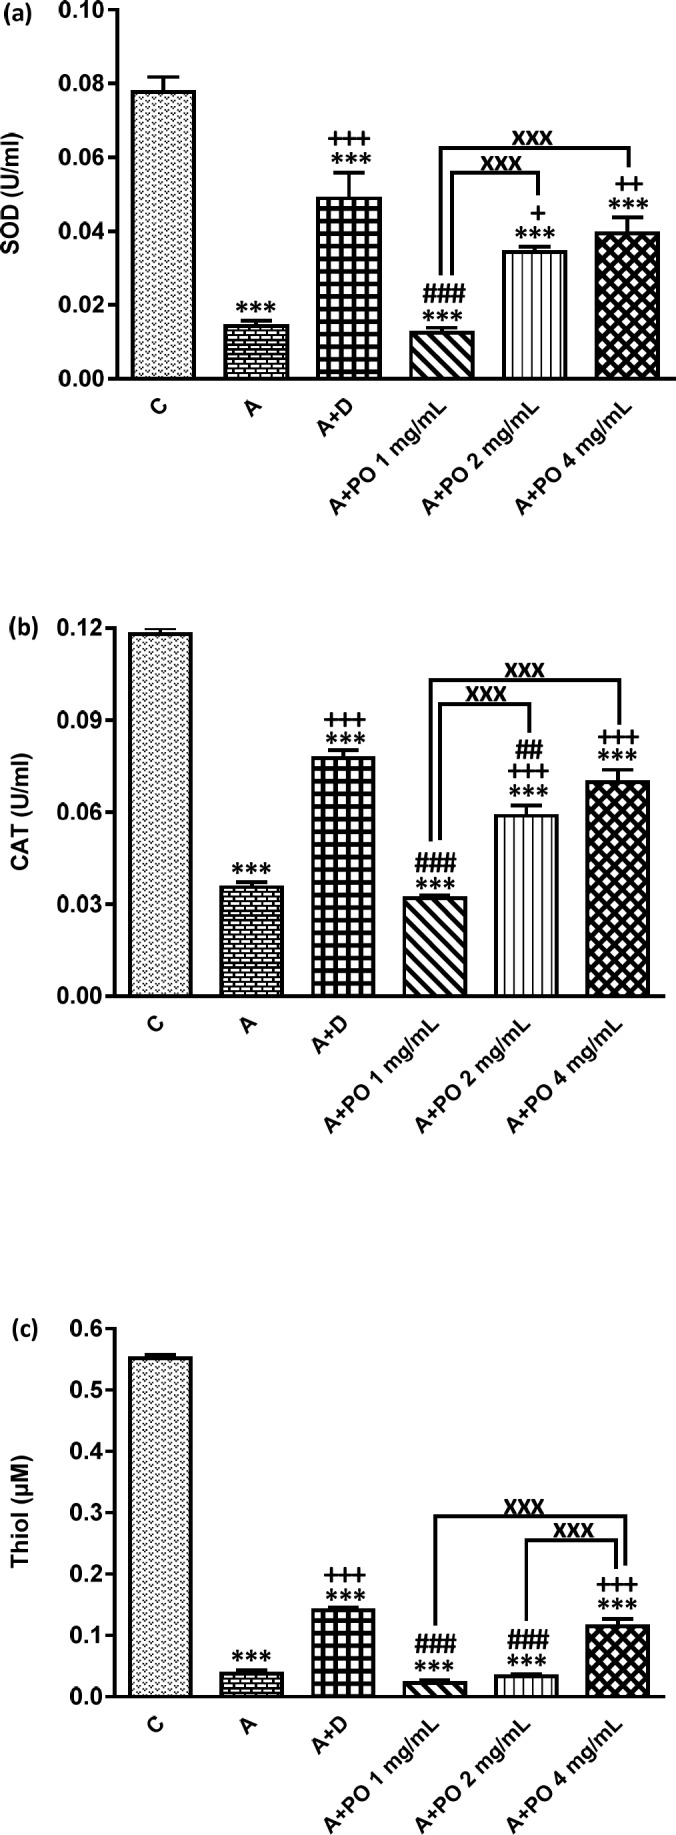 SOD (a), CAT (b) and Thiol (c) levels in bronchoalveolar lavage fluid (BALF) of control (C), asthma (A), asthmatic rats treated with dexamethasone (A+D) and asthmatic rats treated with P. oleracea (PO 1, 2 and 4 mg/mL) (n = 8 in each group). Data are expressed as mean ± SEM values. *** p < 0.001 shows significant differences compared to group C. + p < 0.05, ++ p < 0.01 and +++ p < 0.001 show significant differences compared to group A. ## p < 0.01 and ### p < 0.001 show significant differences compared to group A+D. xxx p<0.001 shows significant differences among the three concentrations P. oleracea. Statistical analyses were performed using ANOVA with Tukey-Kramer’s post-test